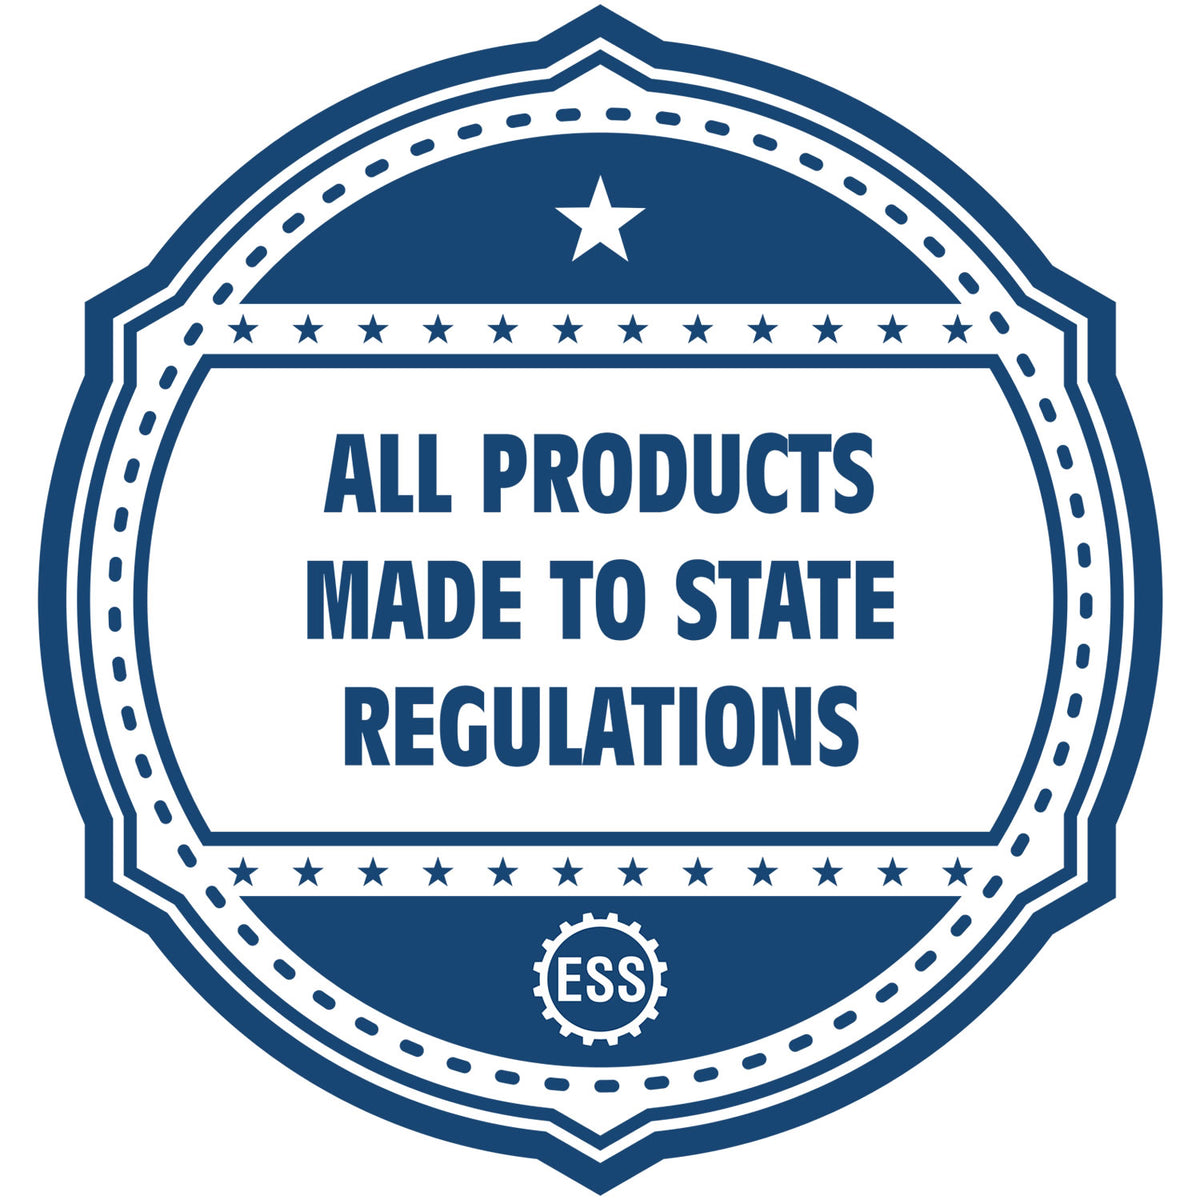 An icon or badge element for the Self-Inking Guam Landscape Architect Stamp showing that this product is made in compliance with state regulations.